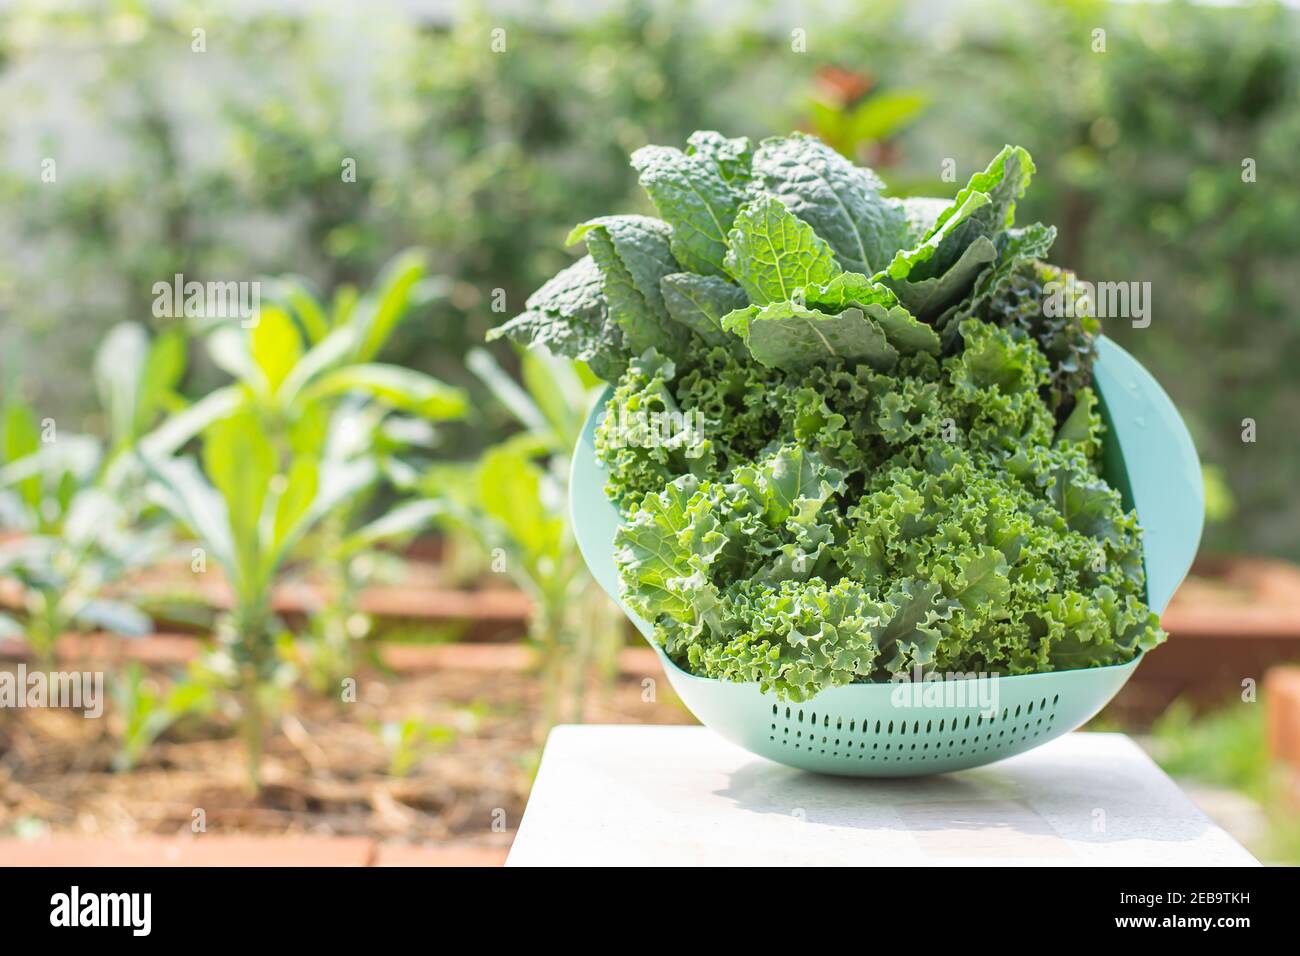 Curl leaf kale and Dinosaur kale or Brassica oleracea grown In the basket Background blurry tree in farm. Stock Photo